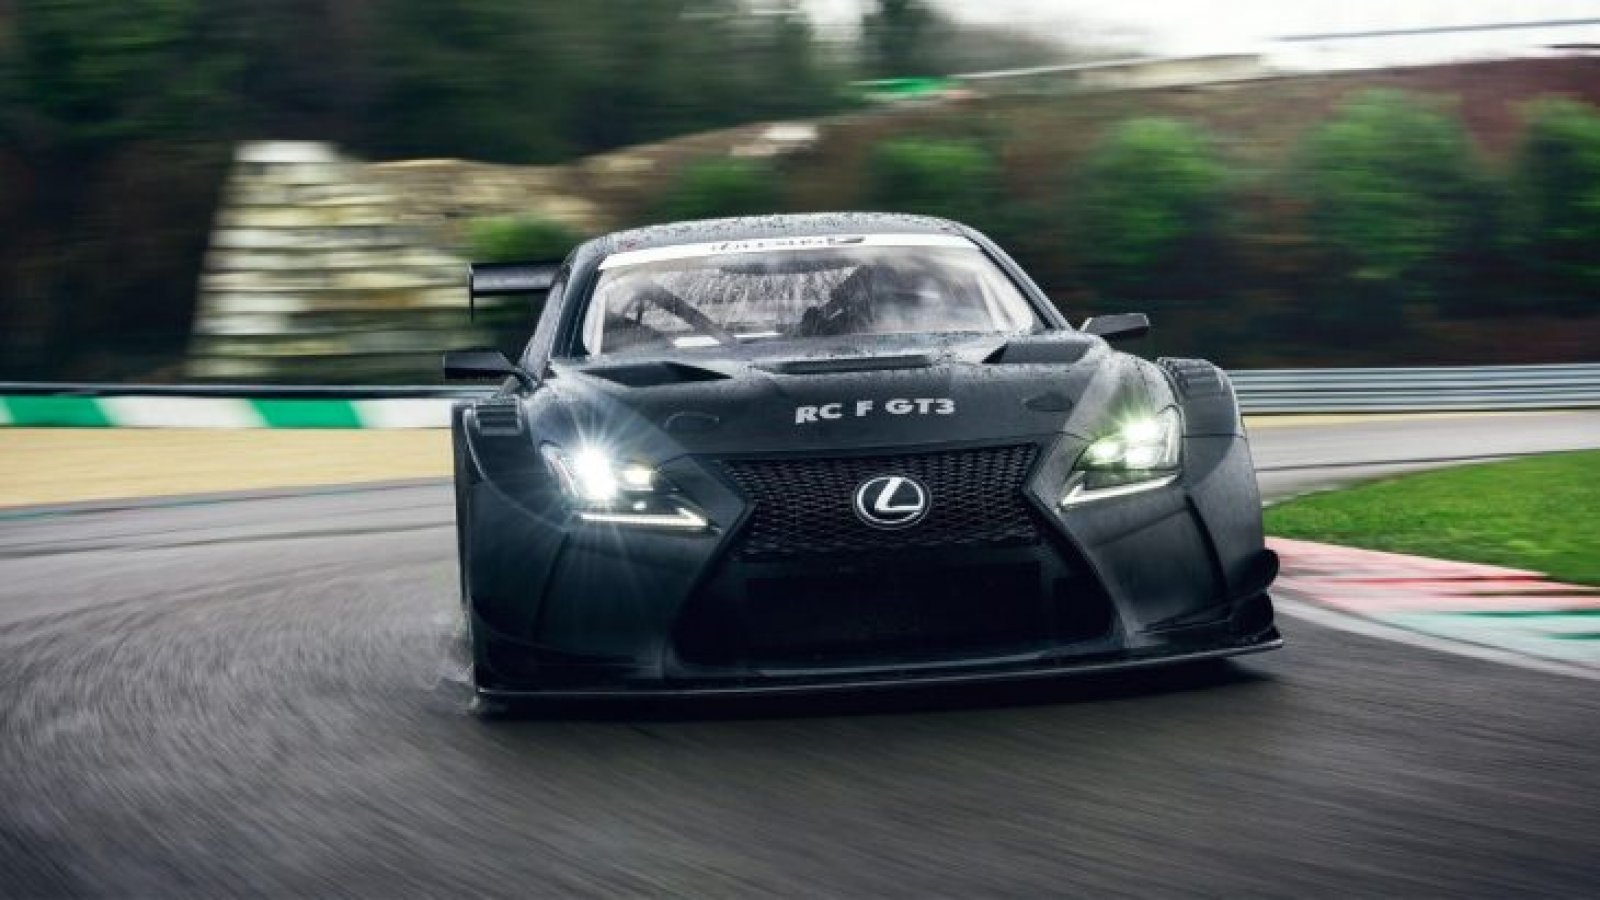 Panis-Barthez Competition and Tech 1 Racing set for full-season assault with Lexus RC F GT3 